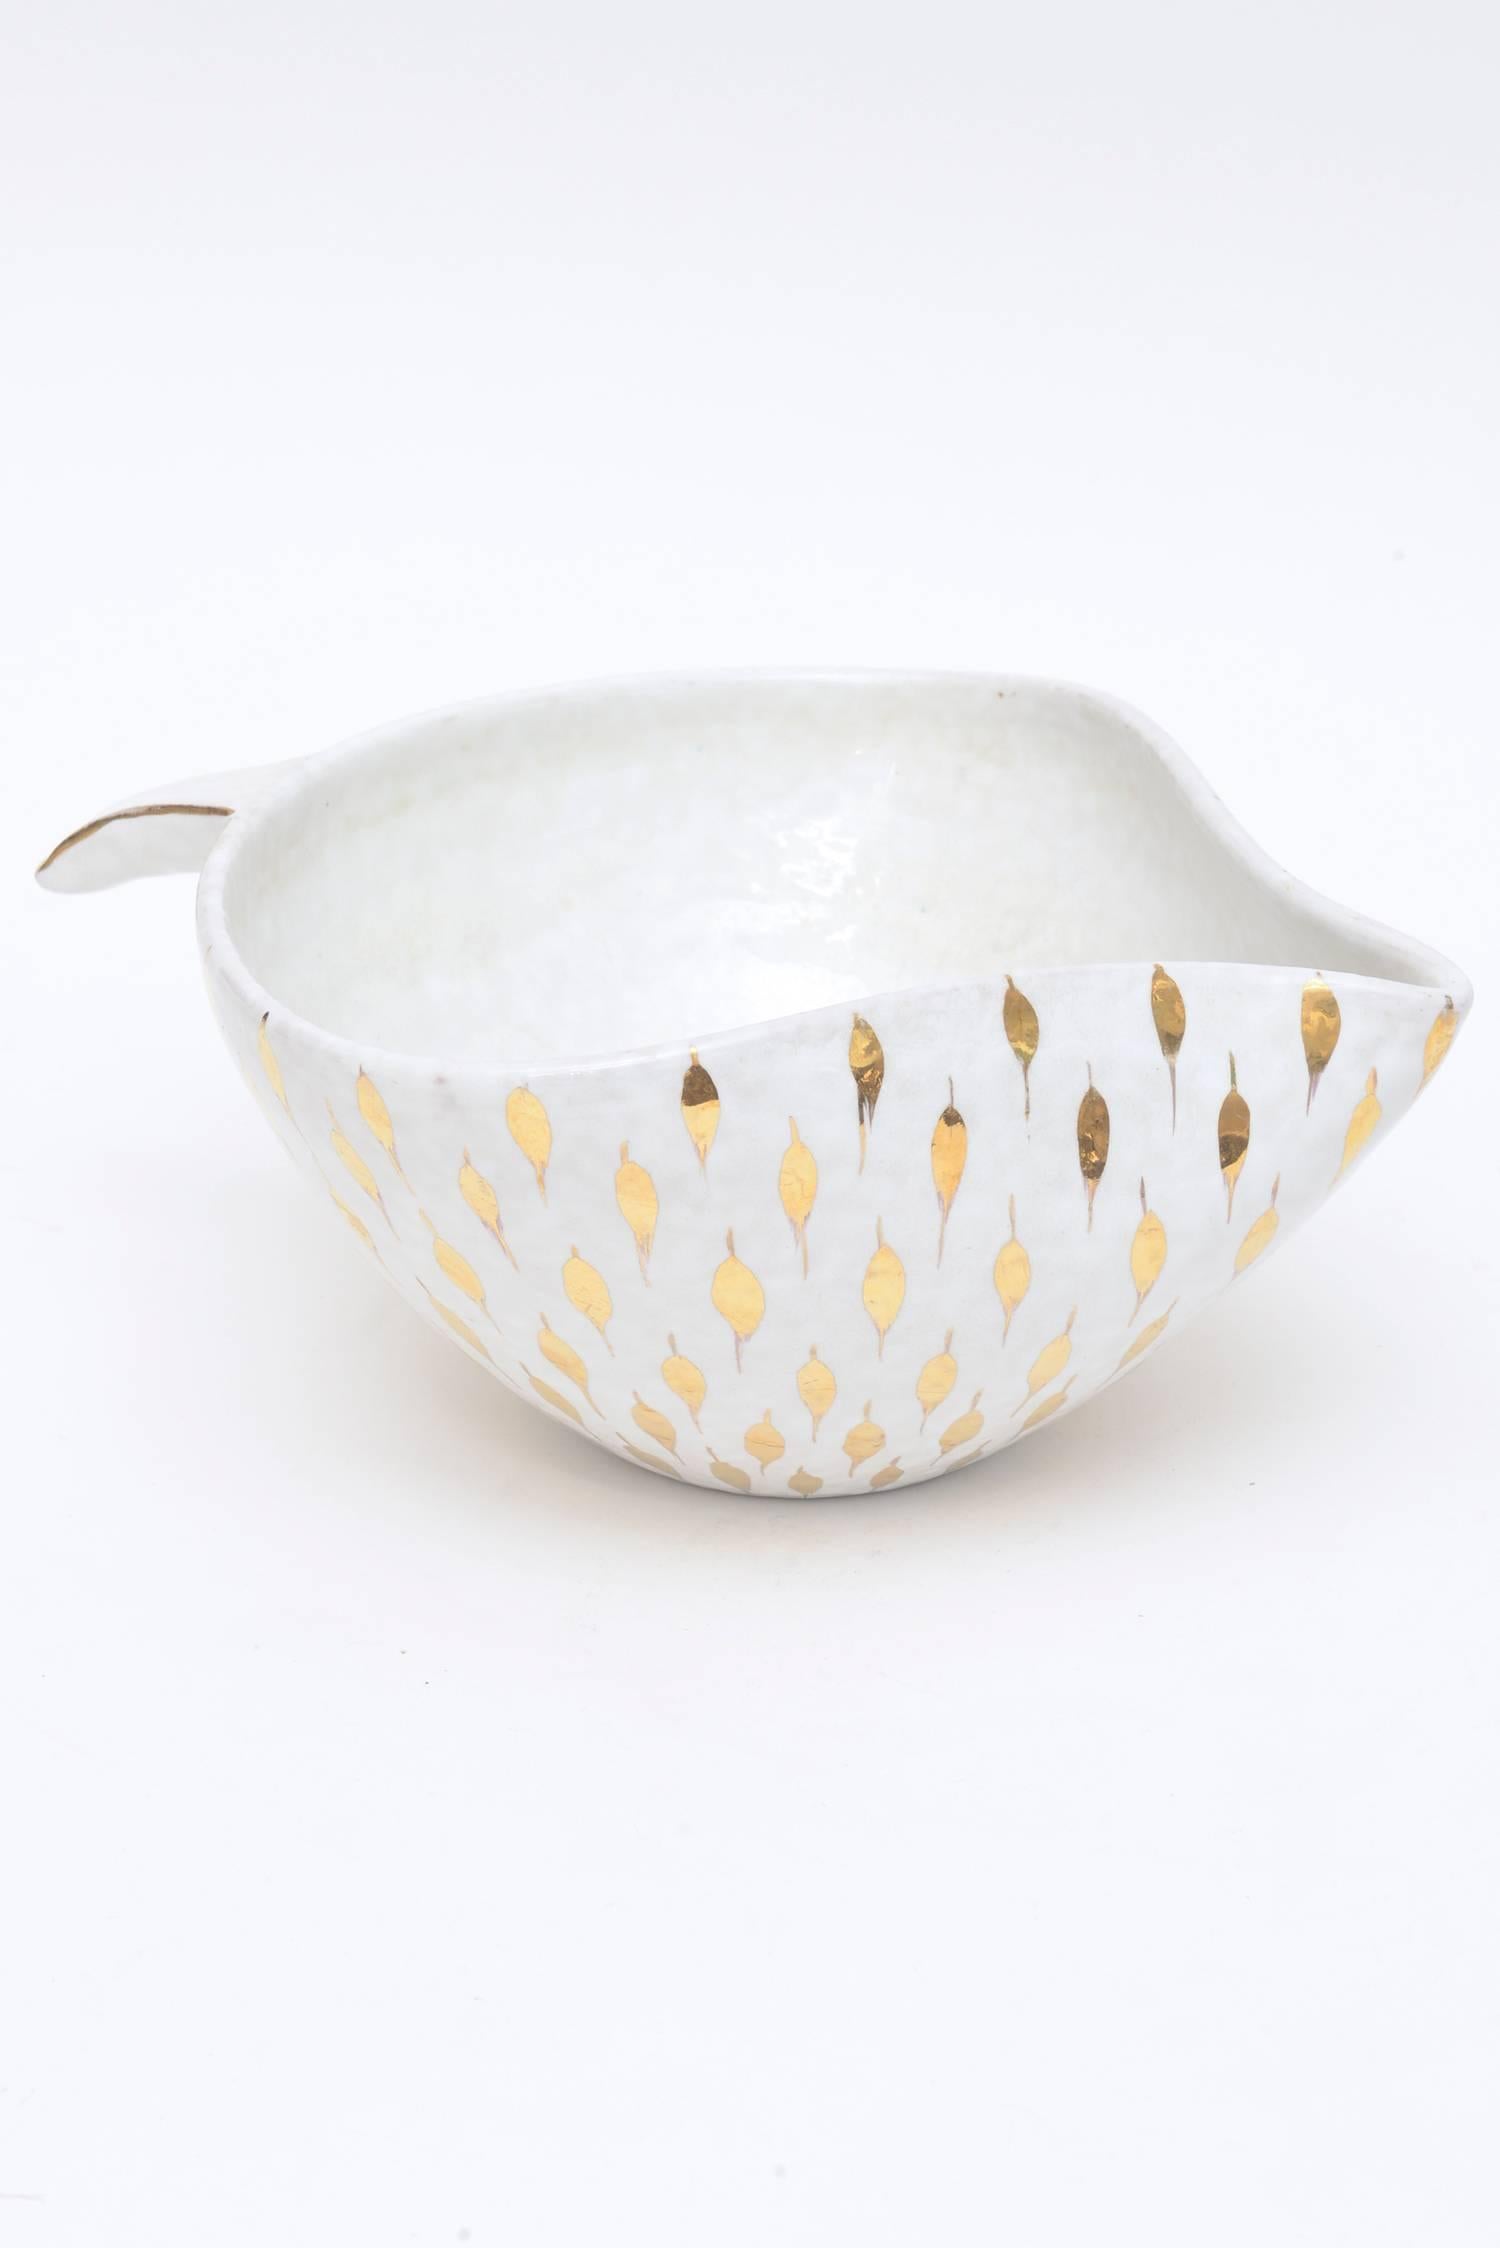 Glazed Aldo Londi For Bitossi Feather Plume Ceramic Bowl Vintage White And Gold For Sale